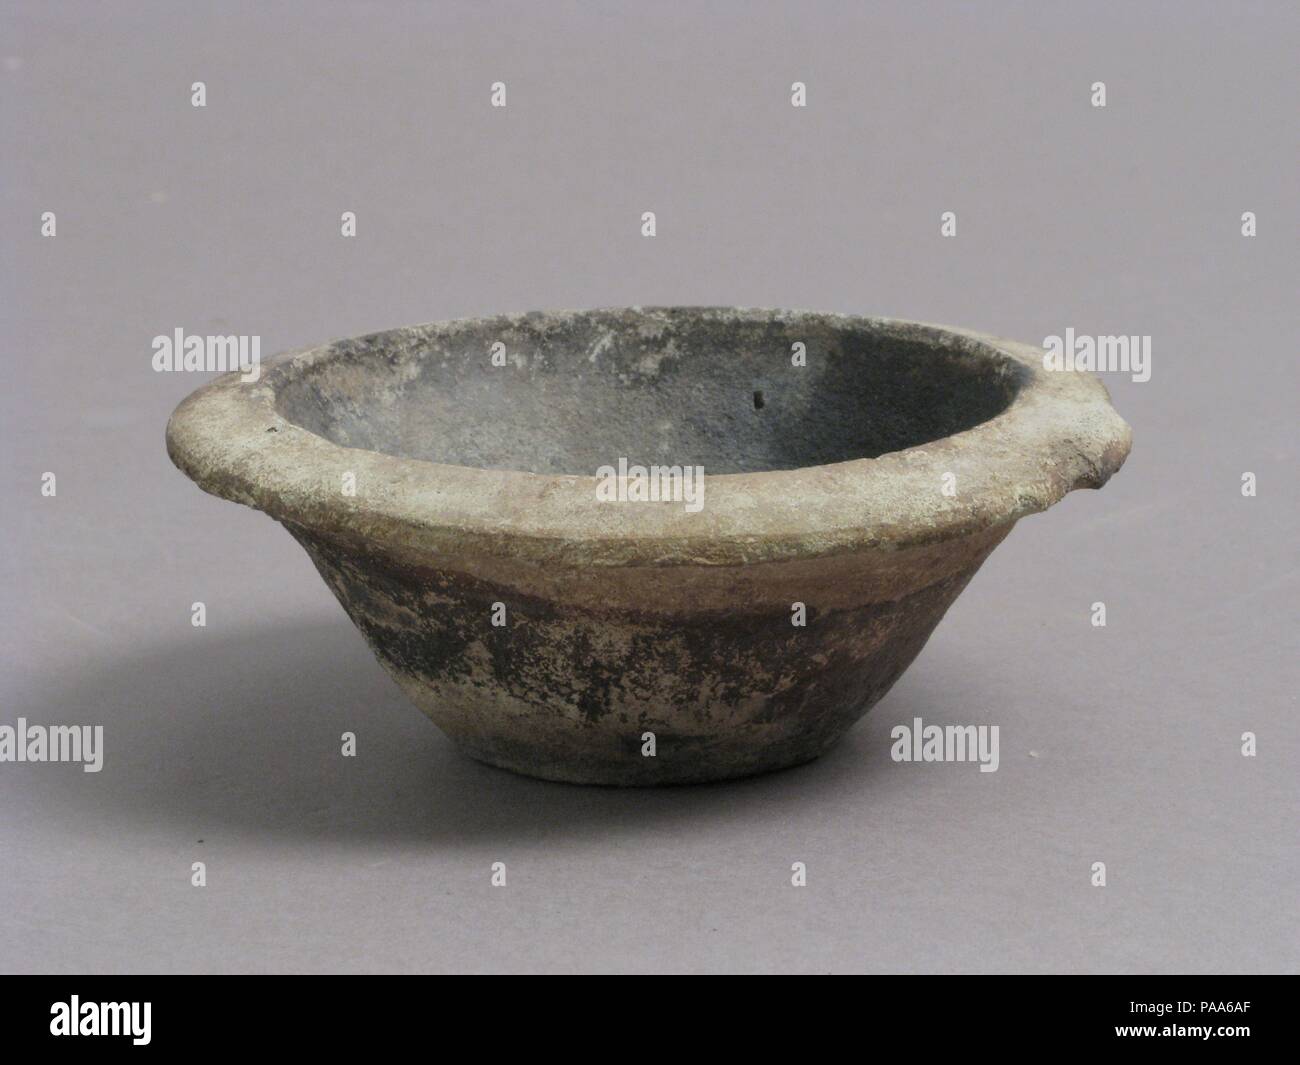 Bowl. Culture: Coptic. Dimensions: Overall: 1 9/16 x 3 7/8 in. (3.9 x 9.8 cm). Date: 4th-7th century. Museum: Metropolitan Museum of Art, New York, USA. Stock Photo